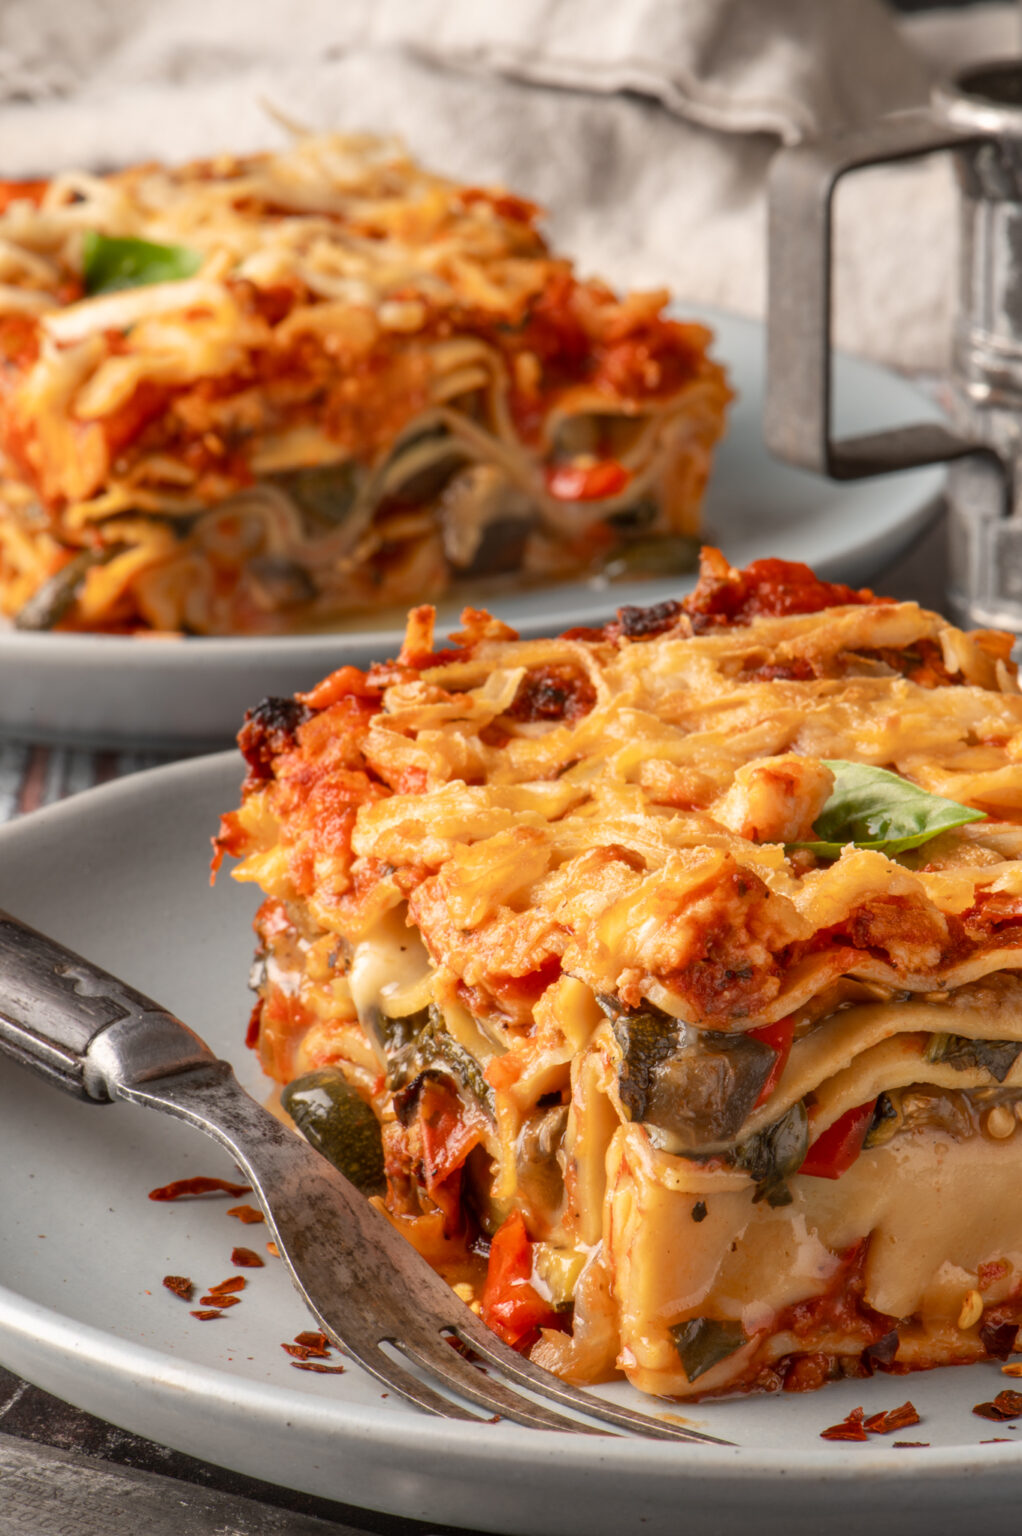 Roasted Vegetable Lasagna Recipe - Planted and Picked